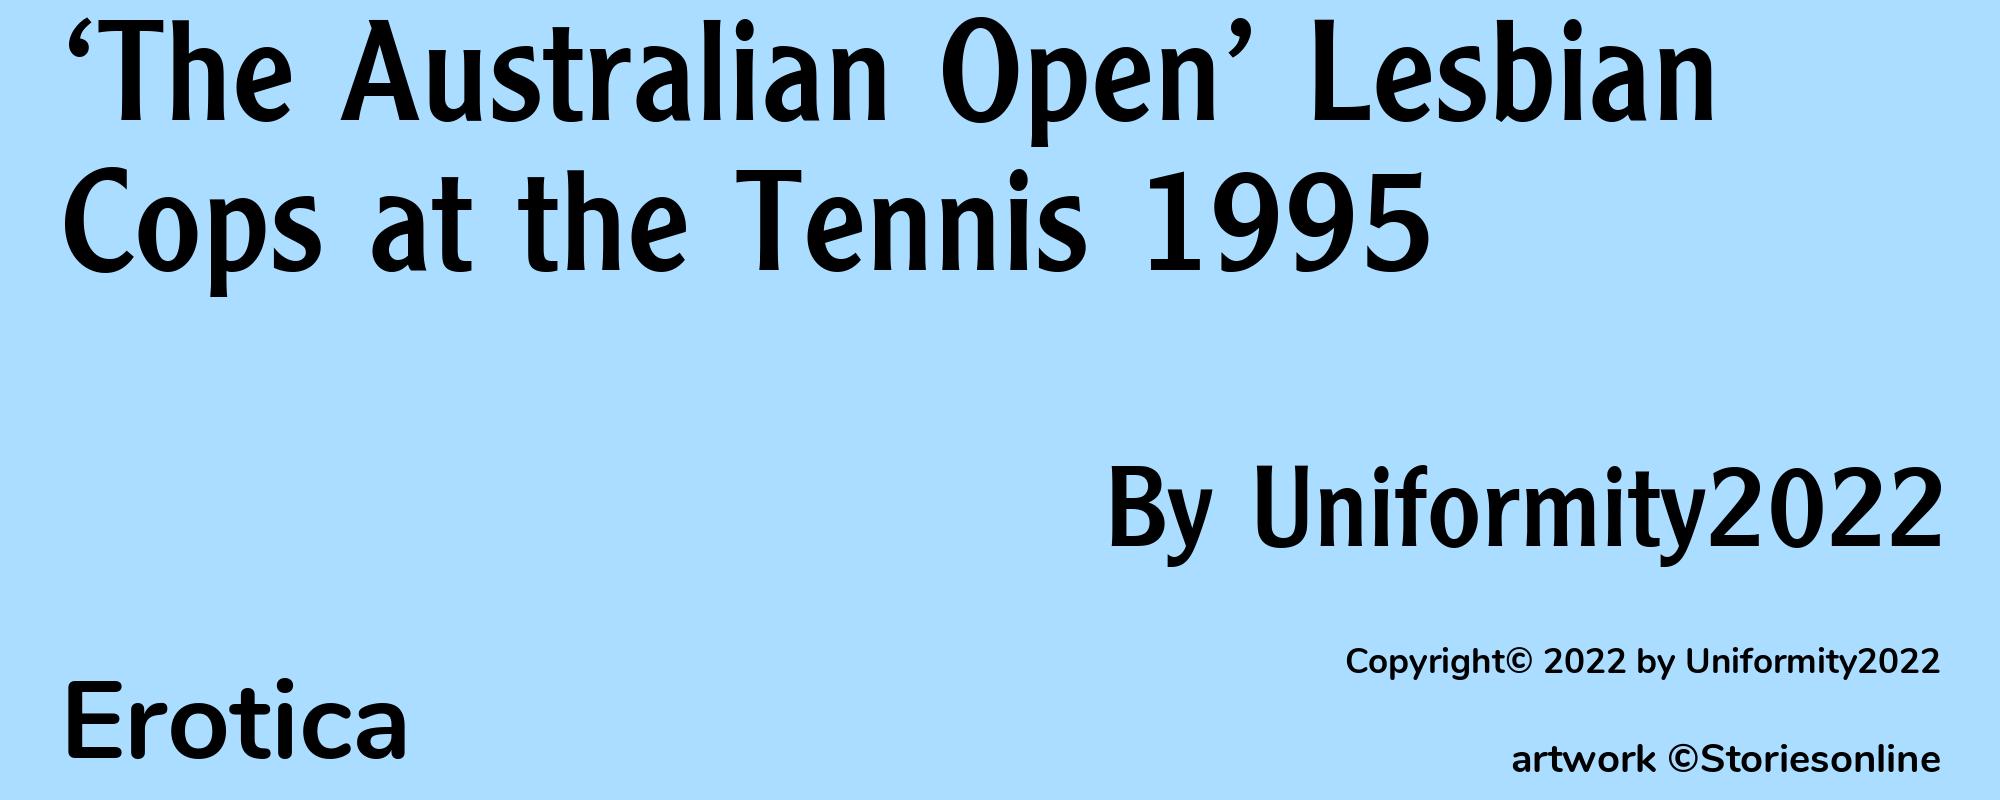 ‘The Australian Open’ Lesbian Cops at the Tennis 1995 - Cover